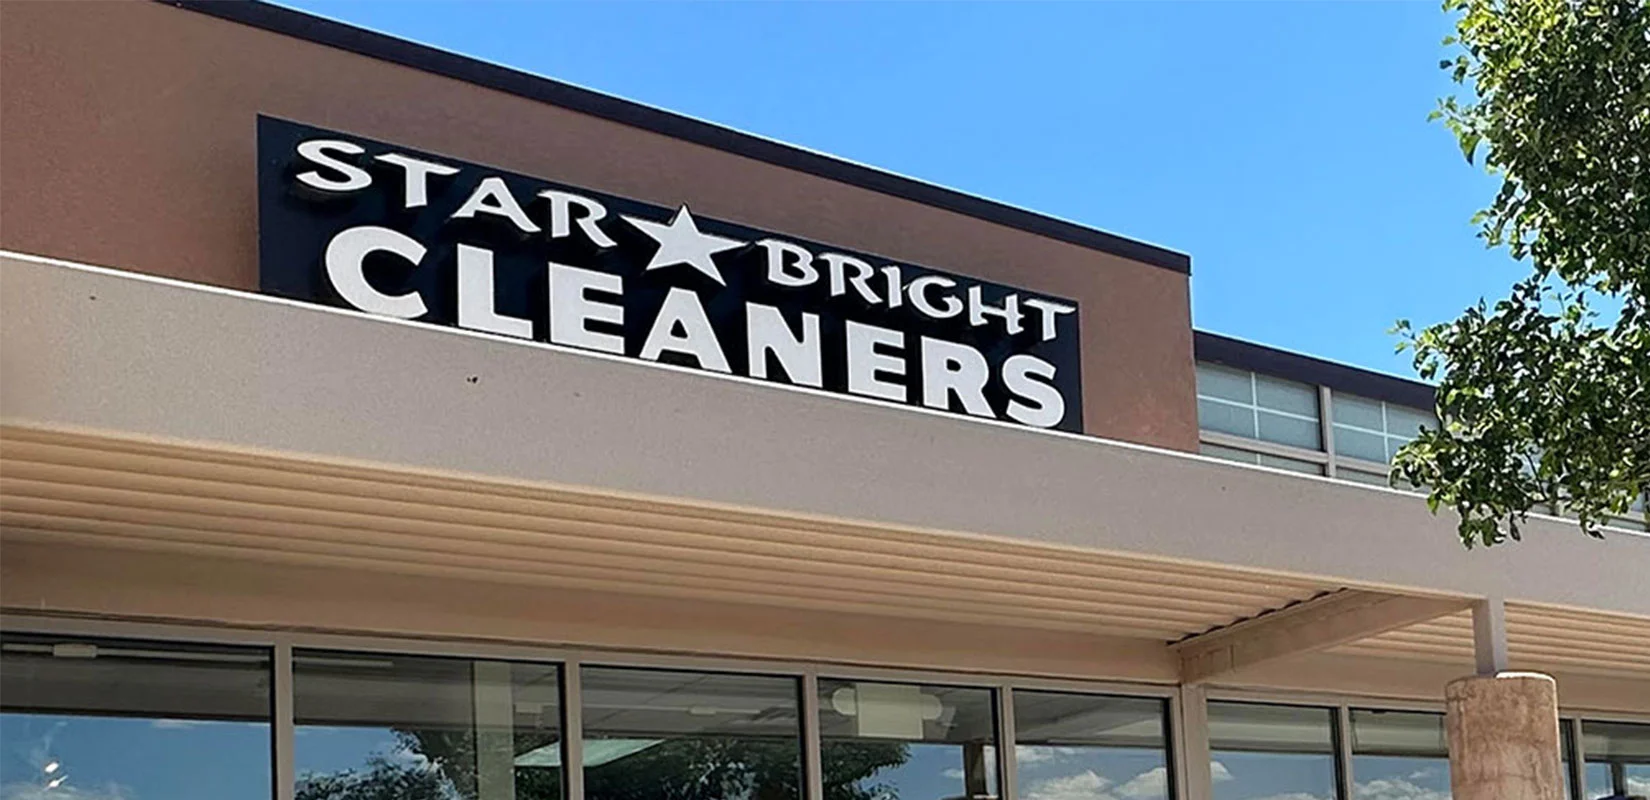 Star Bright Cleaners Locations